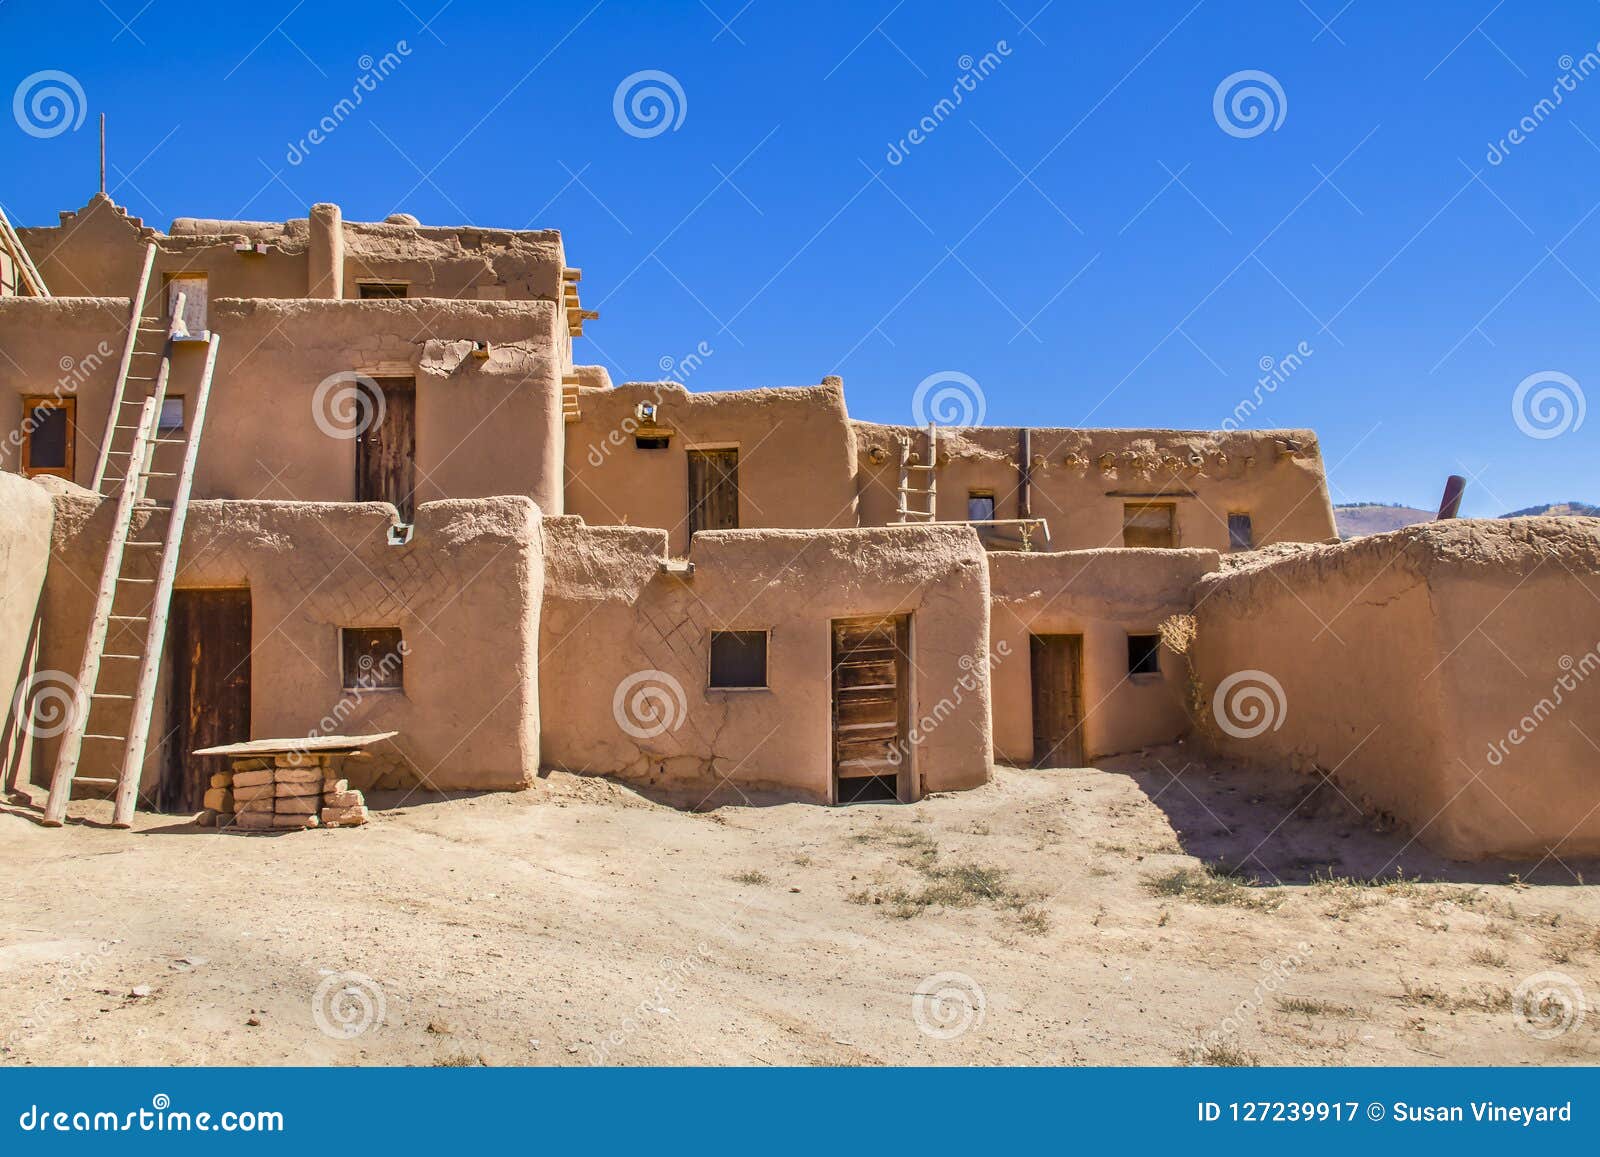 multi-story adobe buildings from taos pueblo in new mexico where indigenous people are still living after over a thousand years